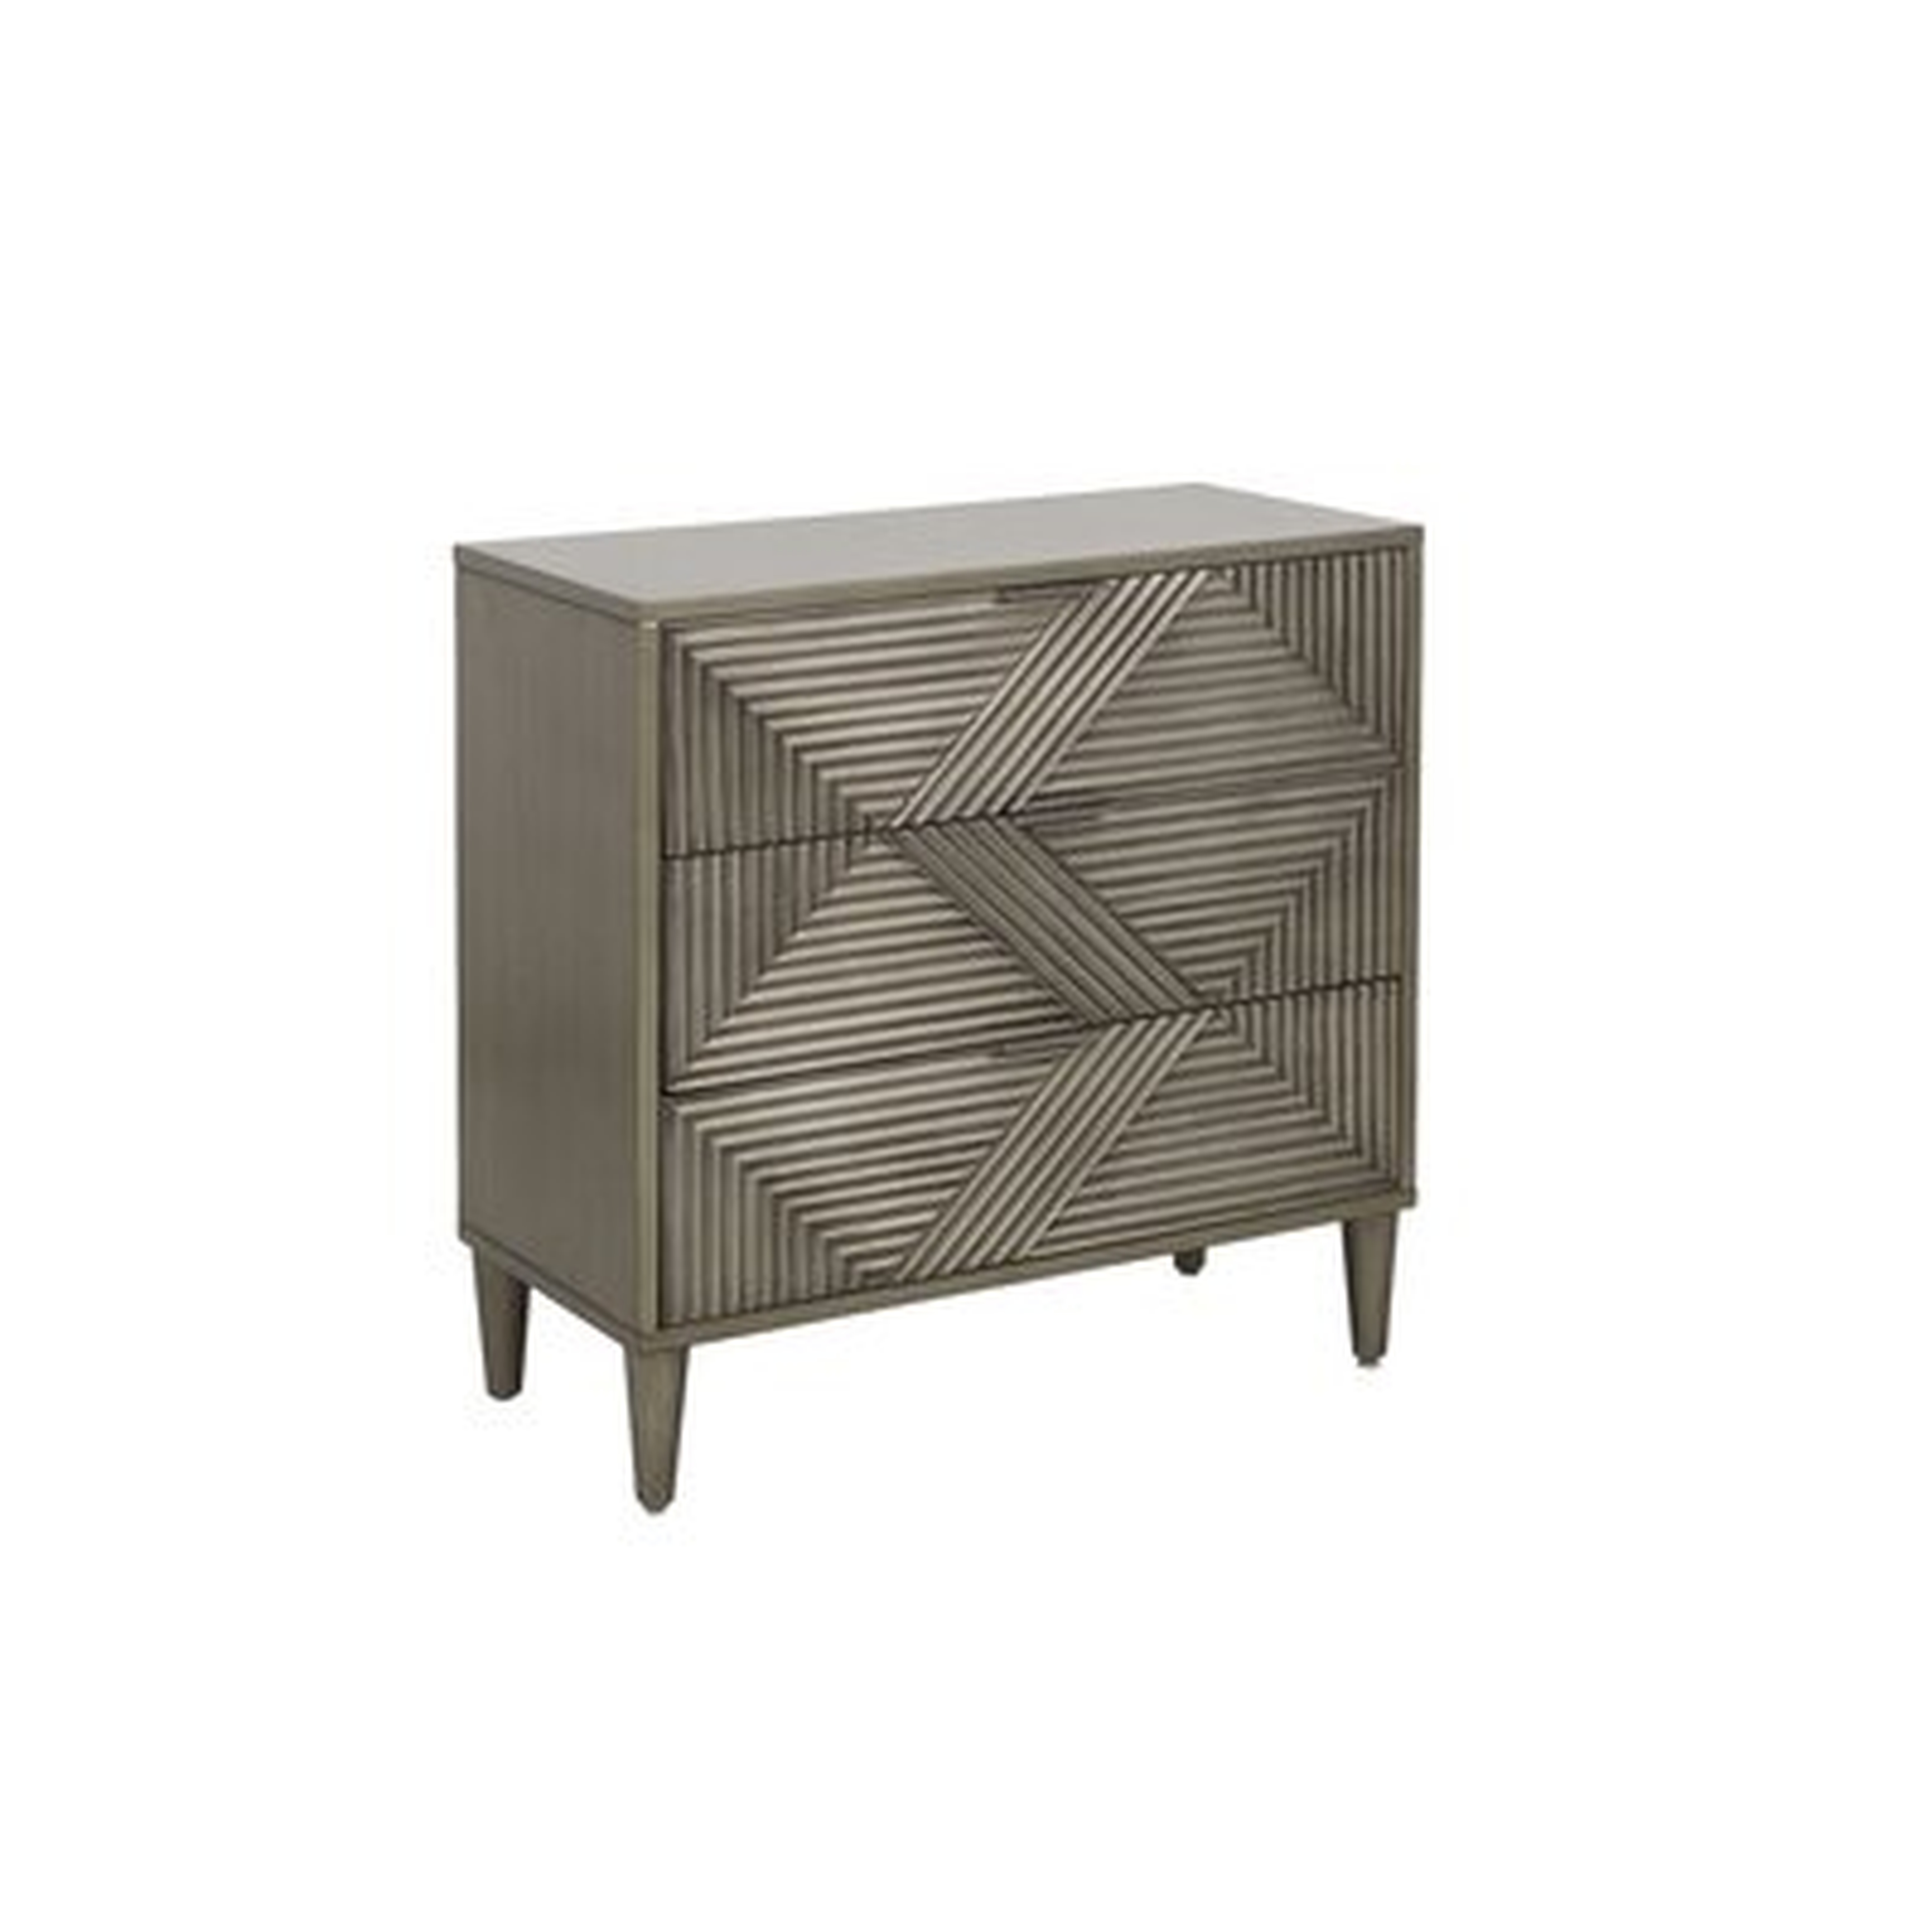 Forkland 3 Drawer Square Accent Chest - Wayfair